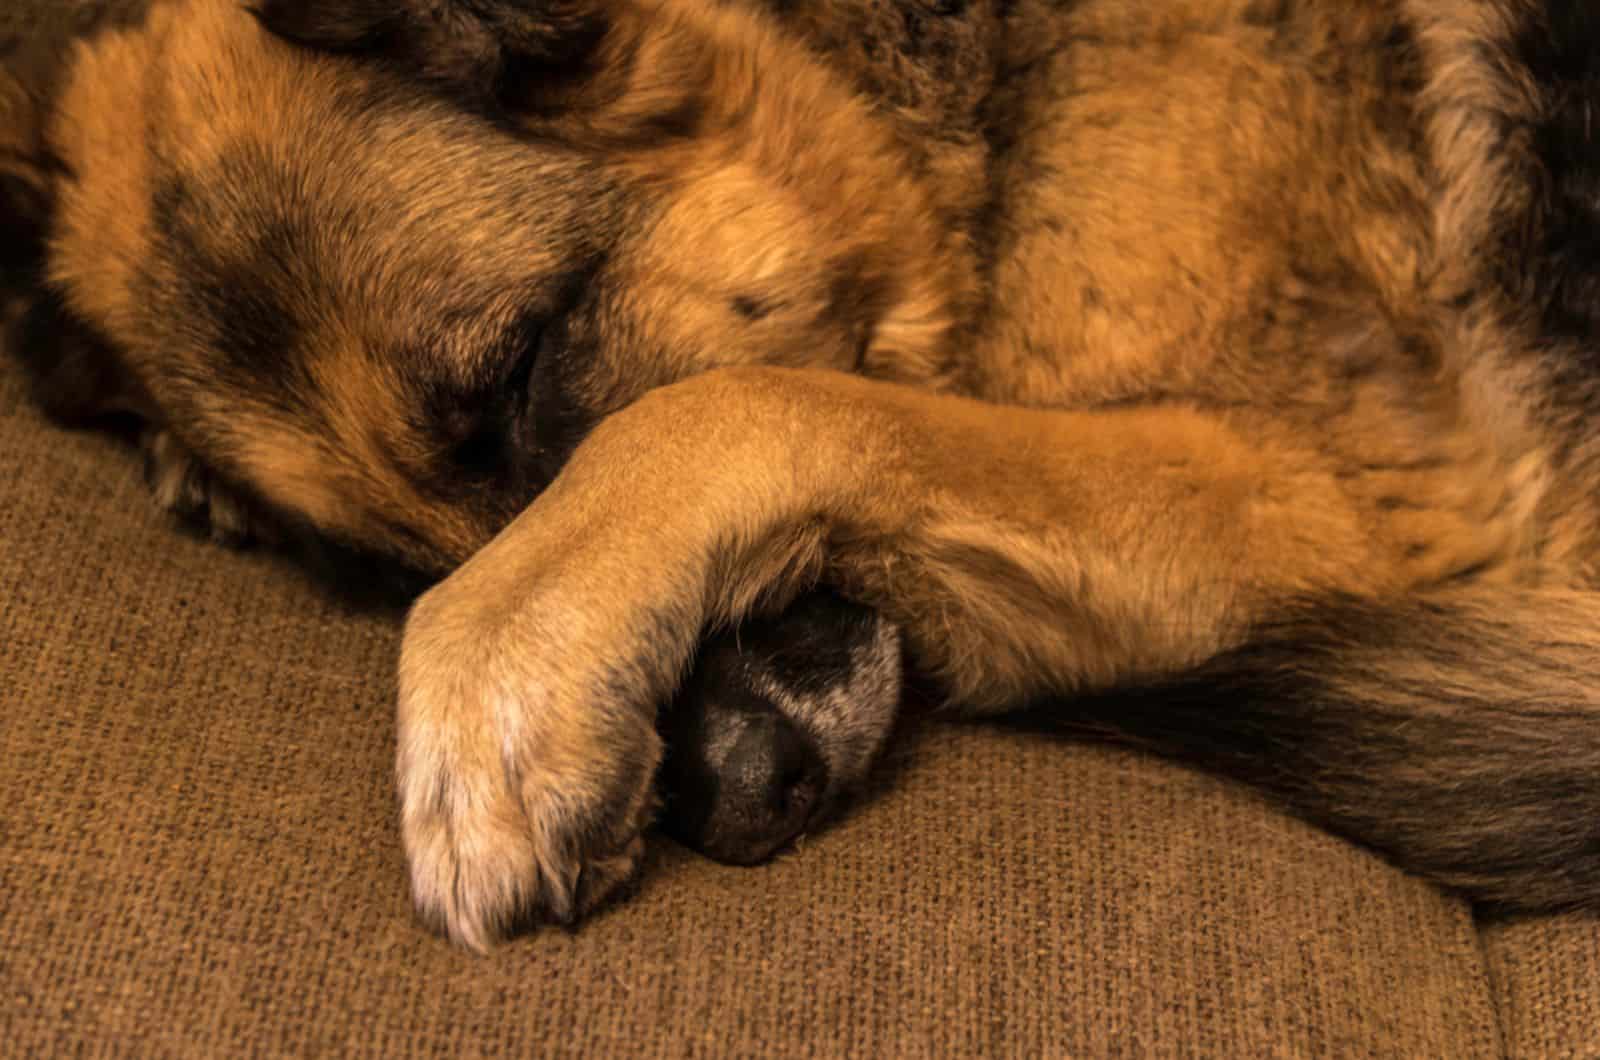 german shepherd sleeping on the couch with his paw over his nose